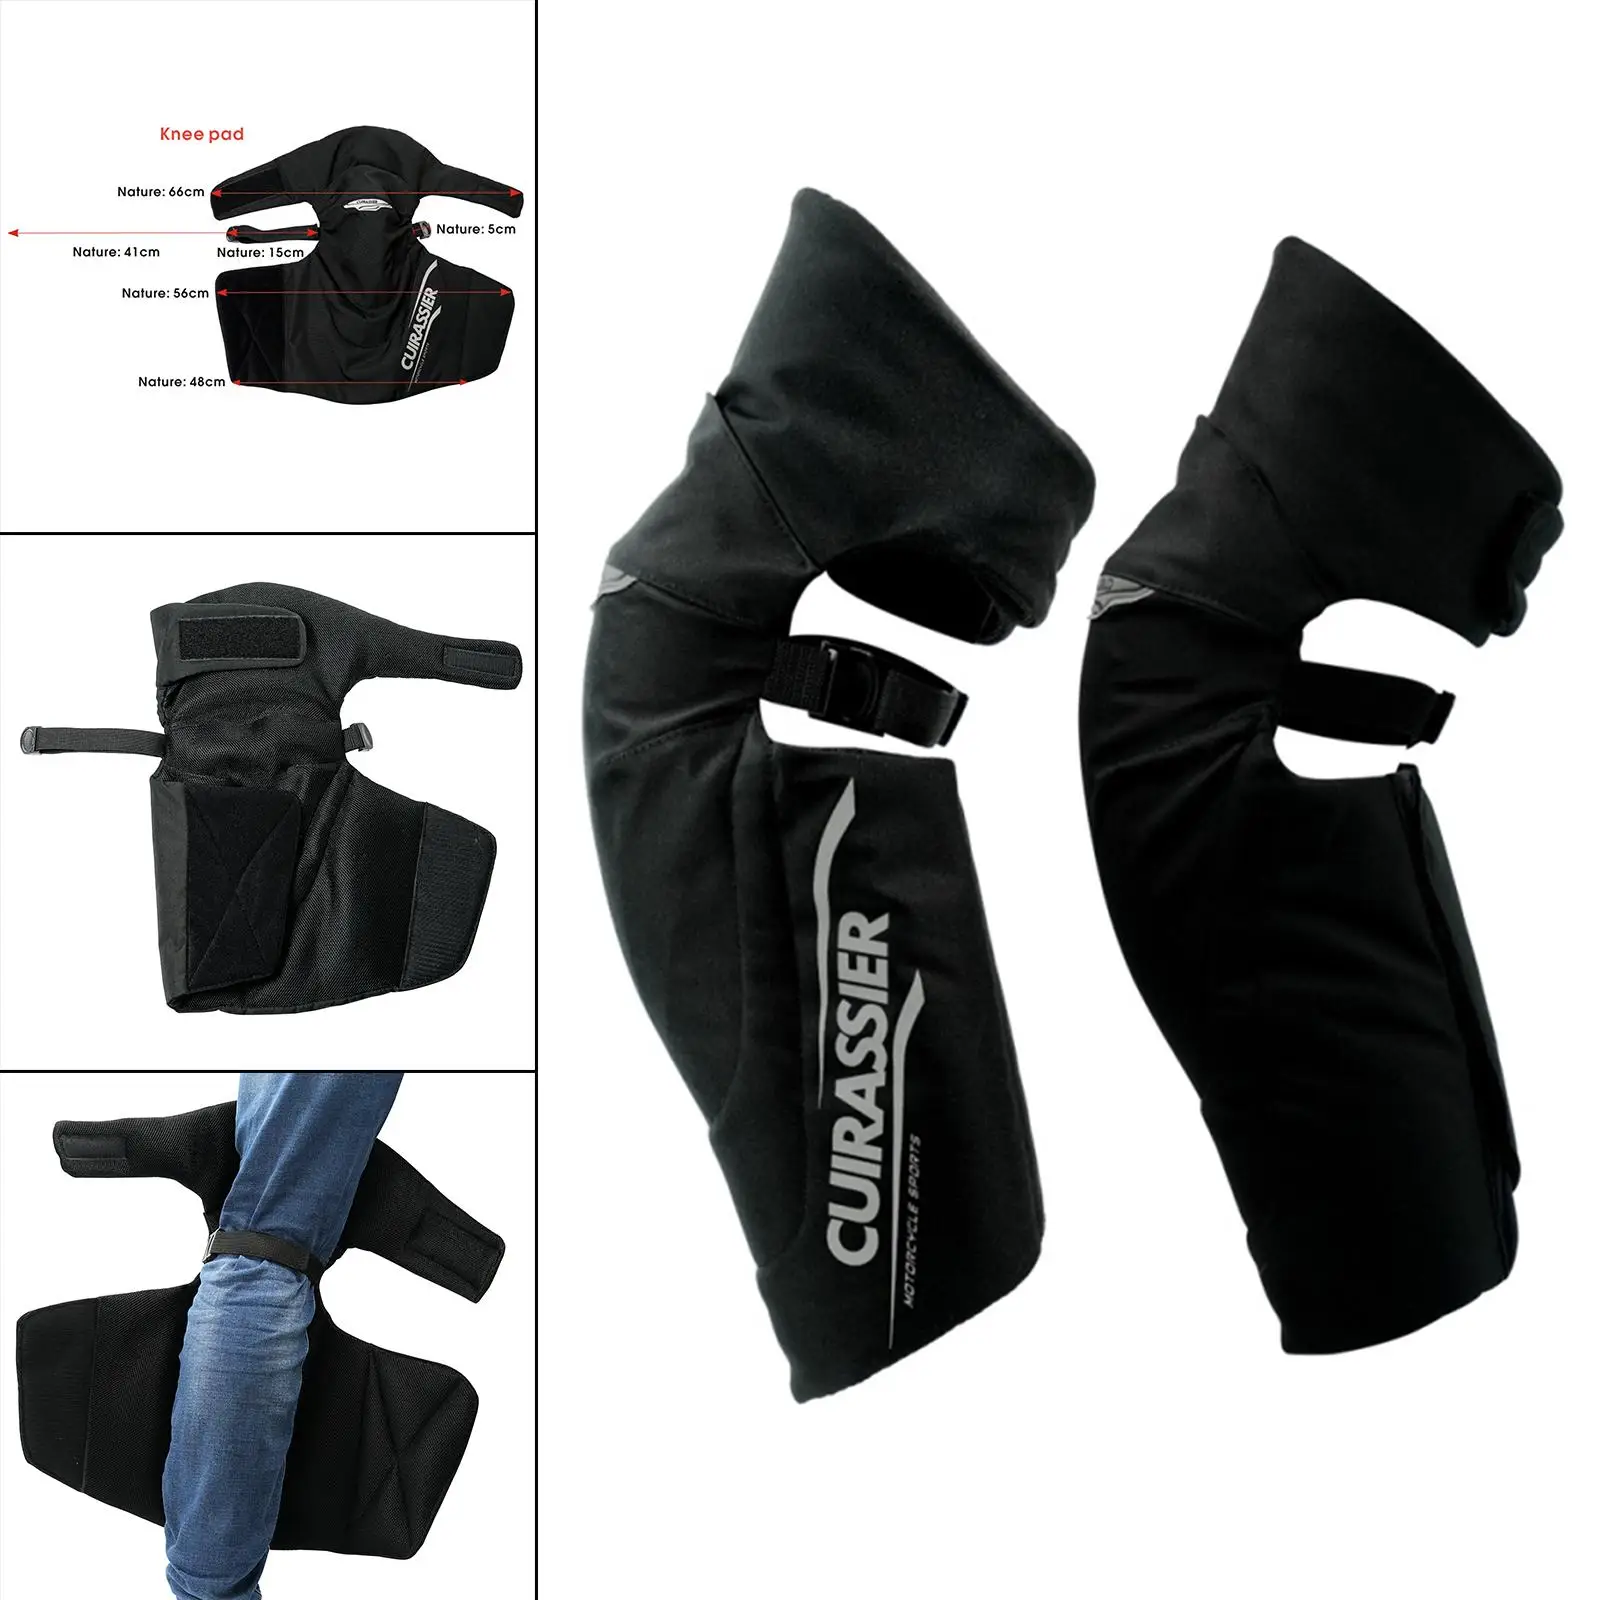 Motorcycle Knee Pads Guards Oxford Cloth Gaiter Fit for Motocross Cycling